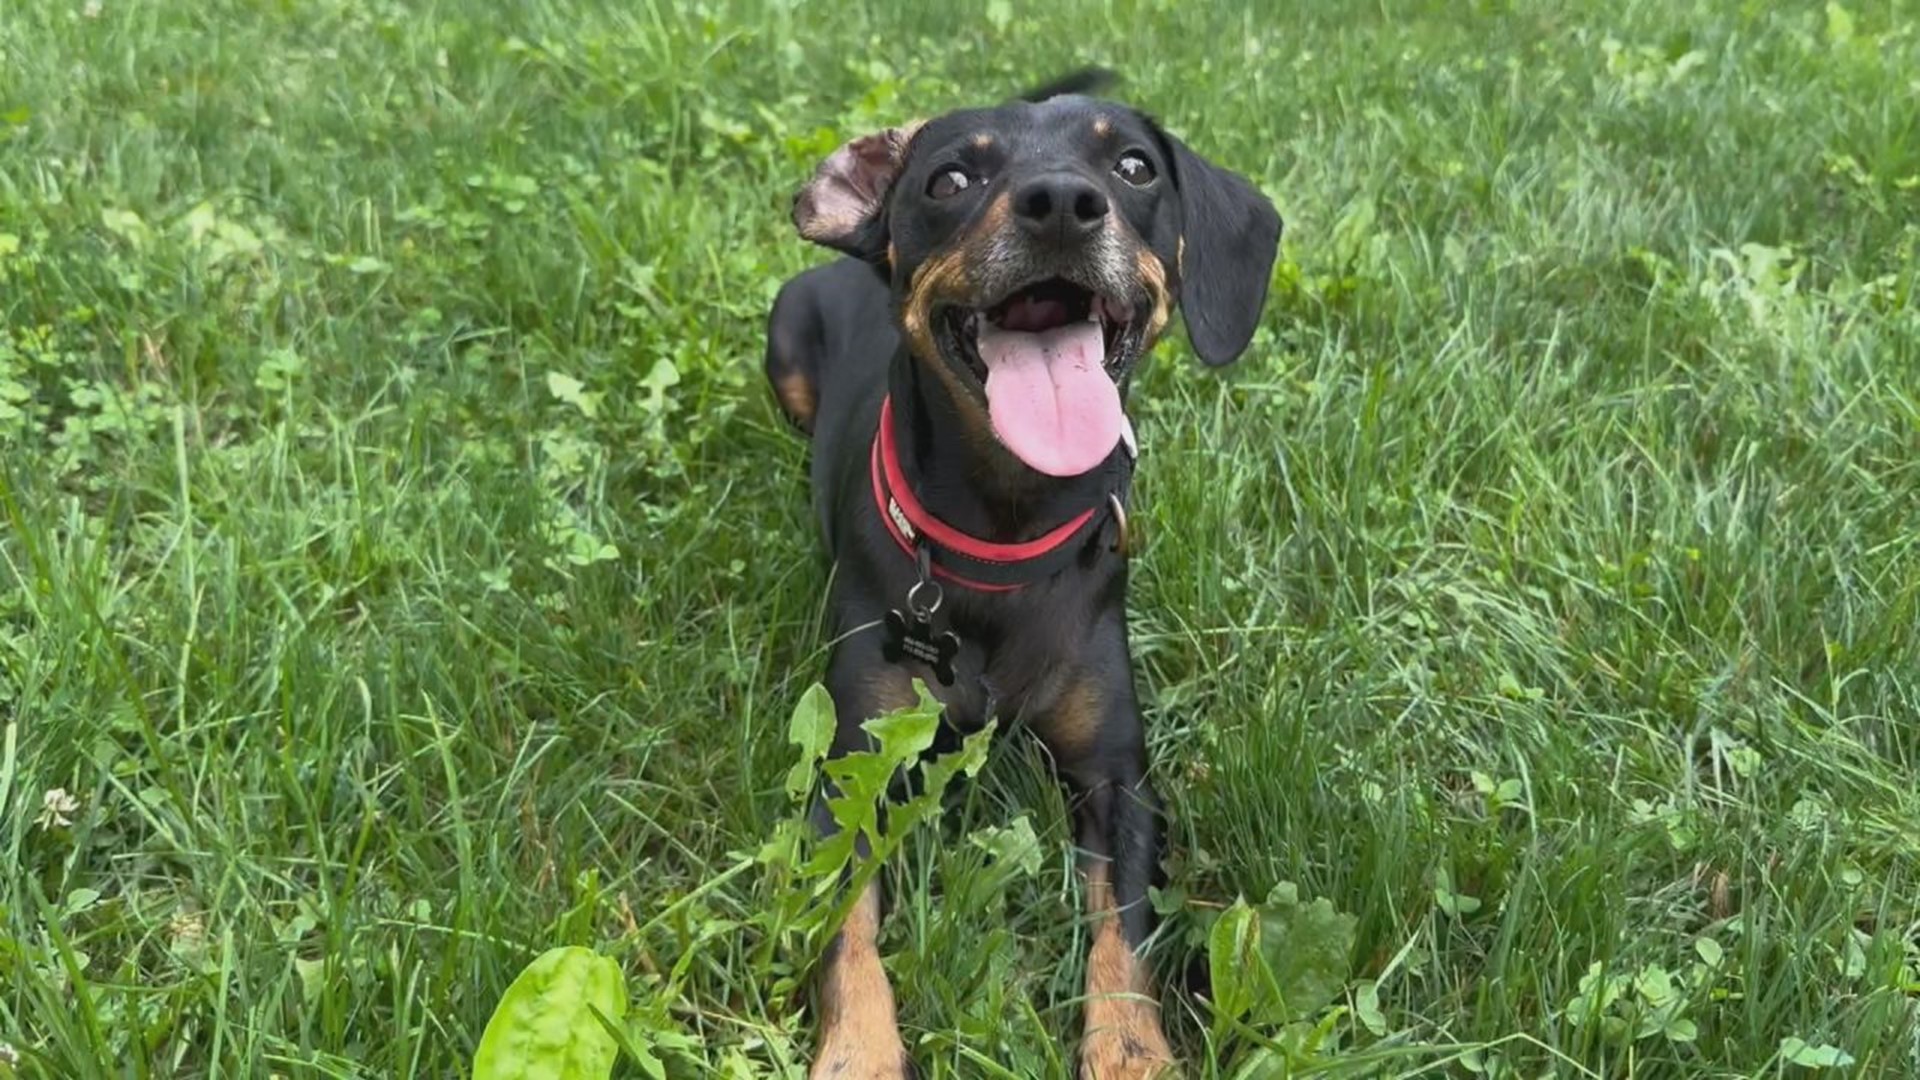 Boomer is an energetic dachshund mix who loves to run around and play fetch.